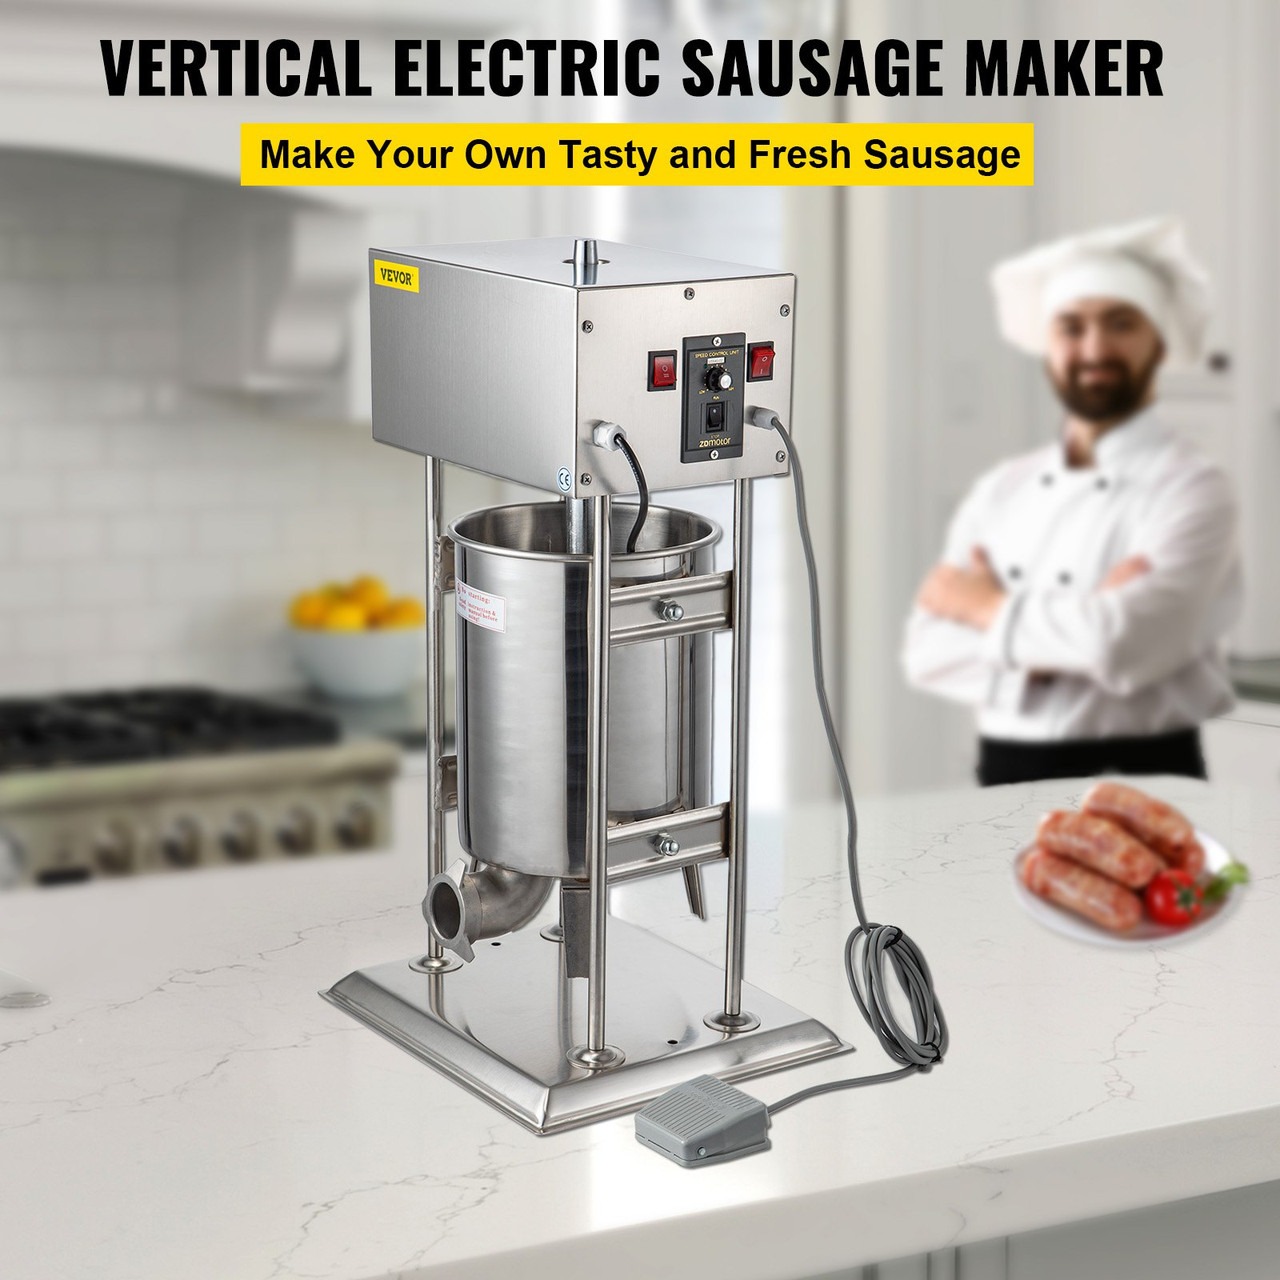 Electric Sausage Stuffer 30L Capacity, Vertical Meat Stuffer Maker Variable Speed, Stainless Steel Sausage Filler Machine with 5 Filling Funnels for Home Restaurant Use